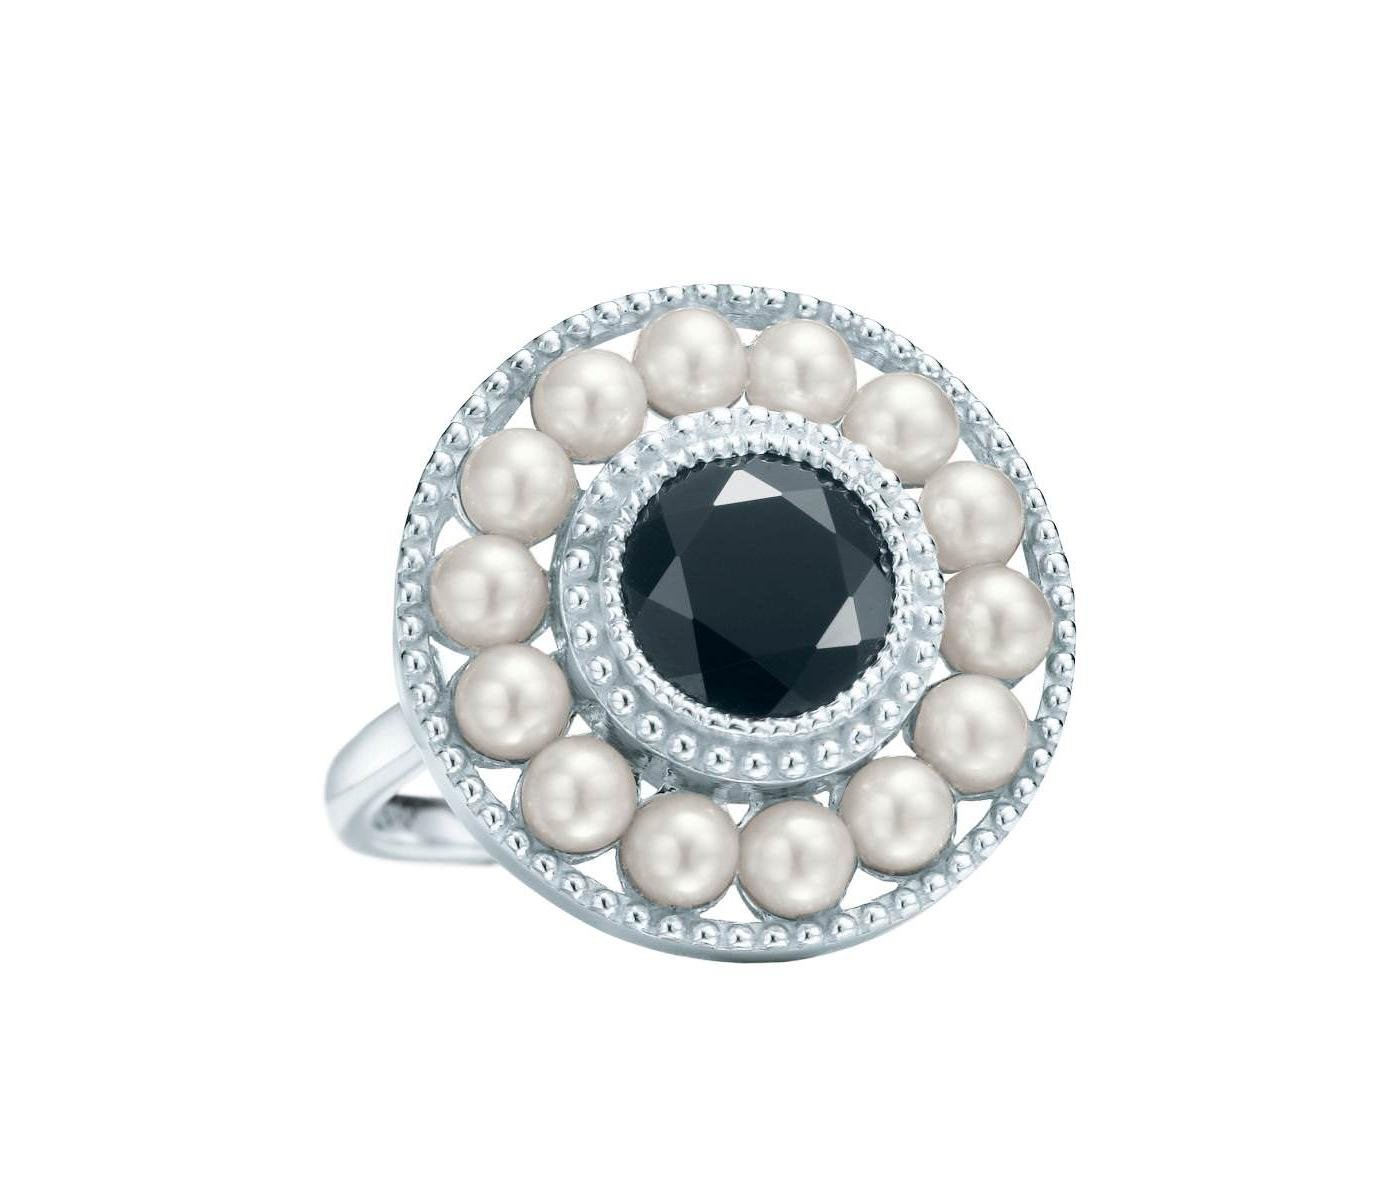 Ring by Tiffany & Co.